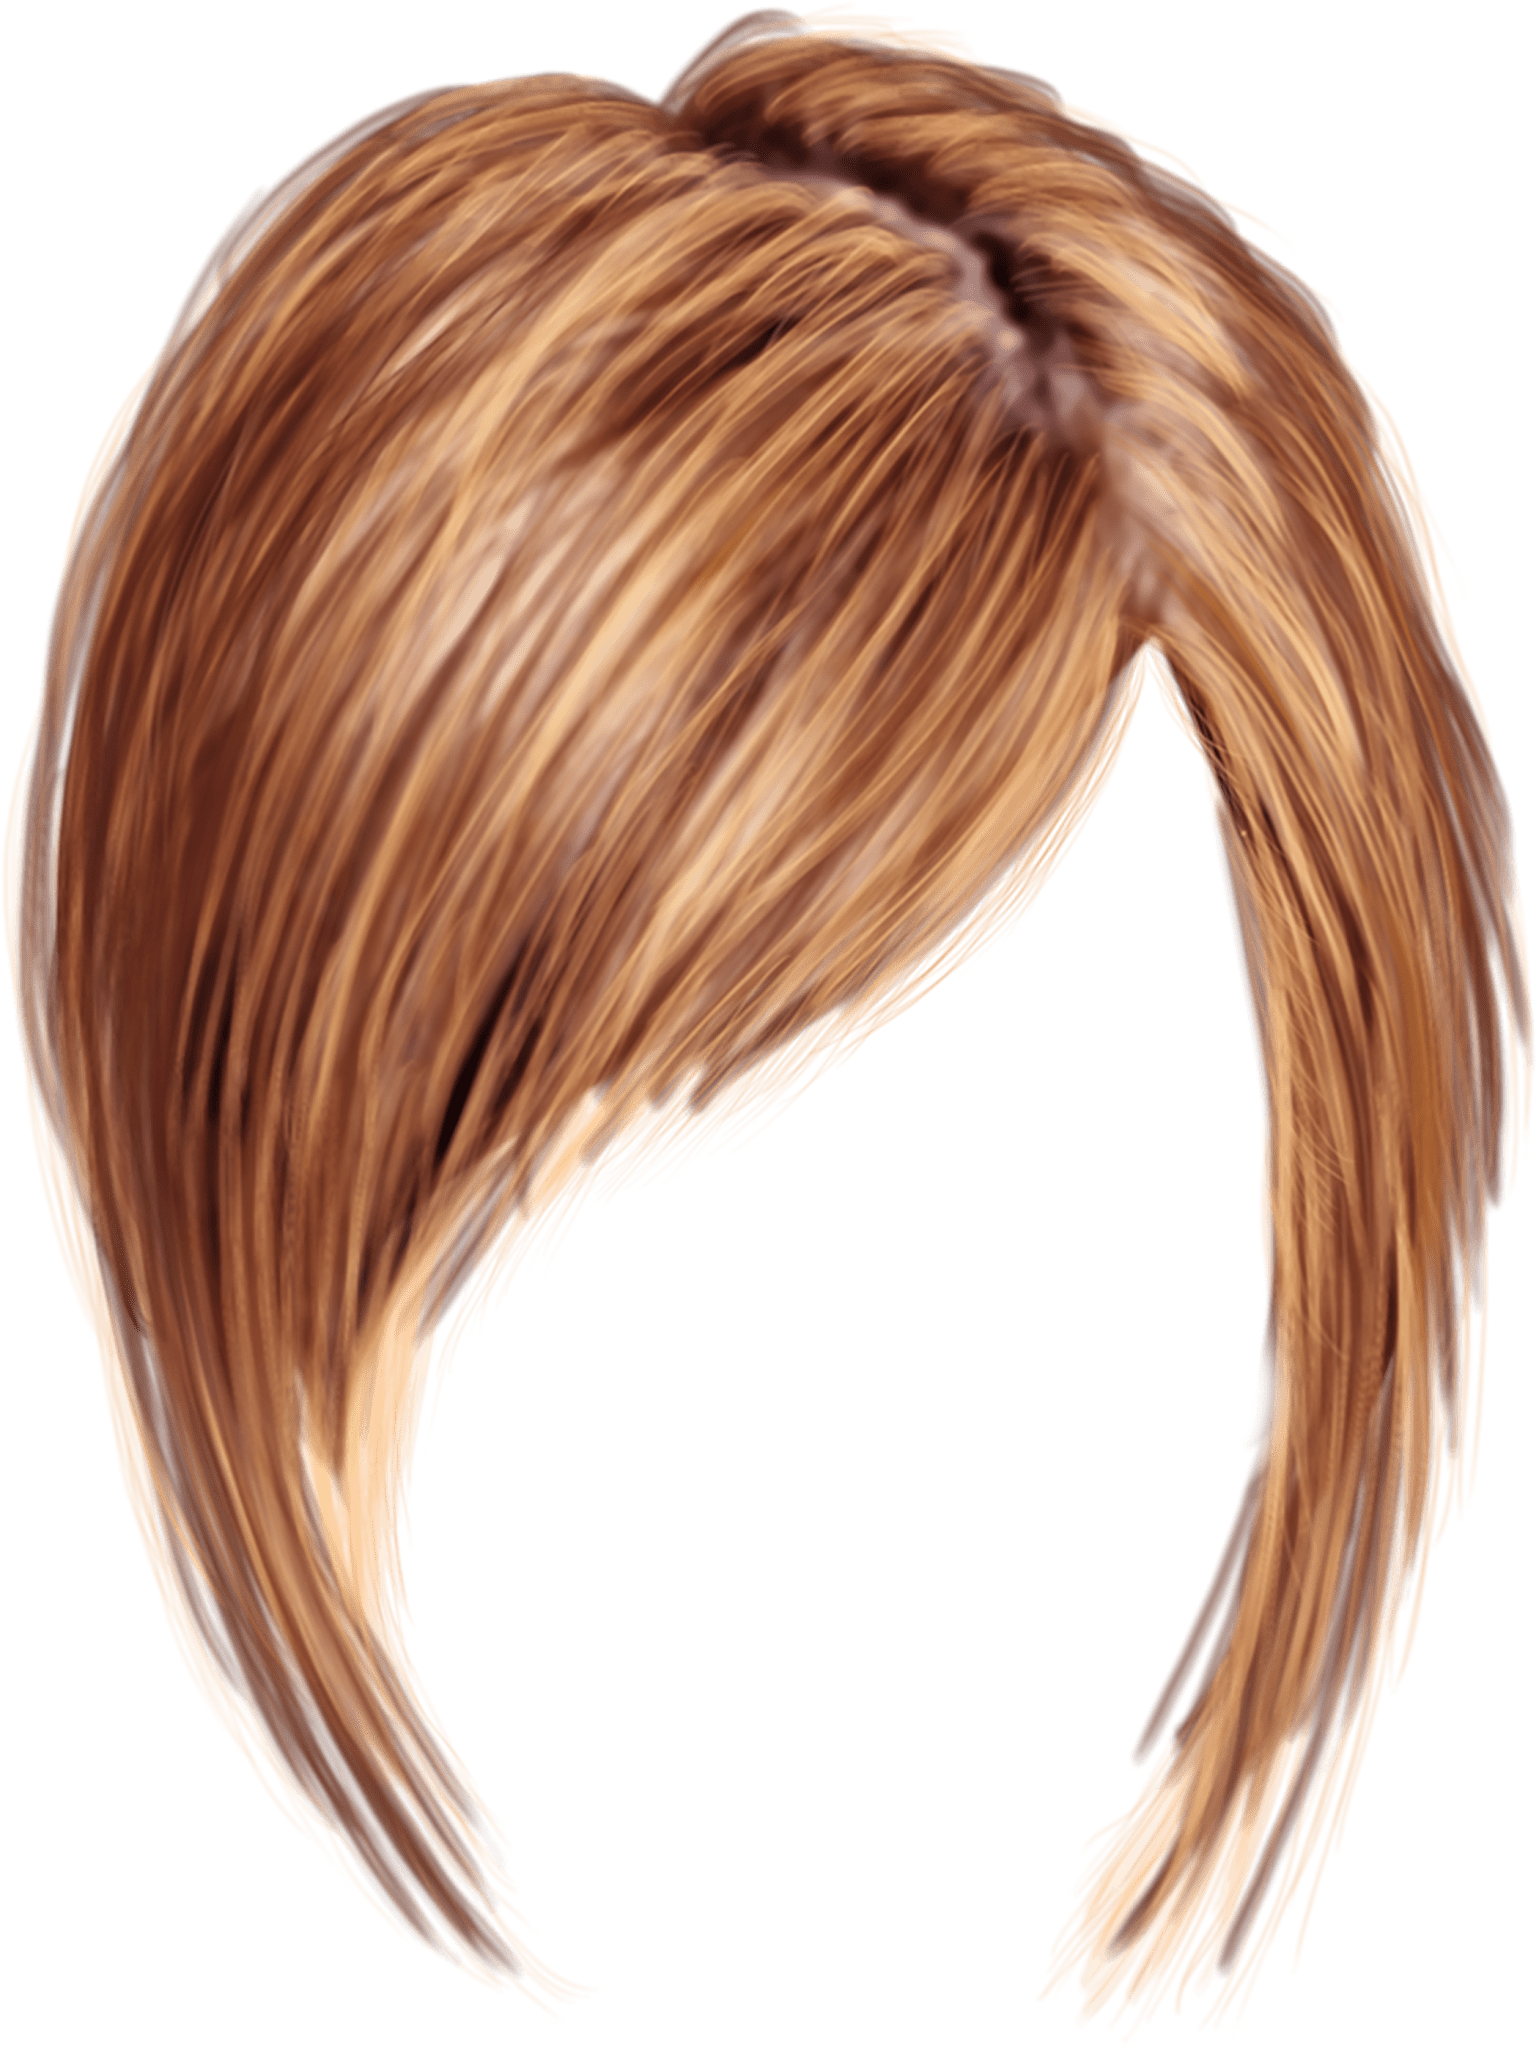 Women Hair PNG Image for Free Download